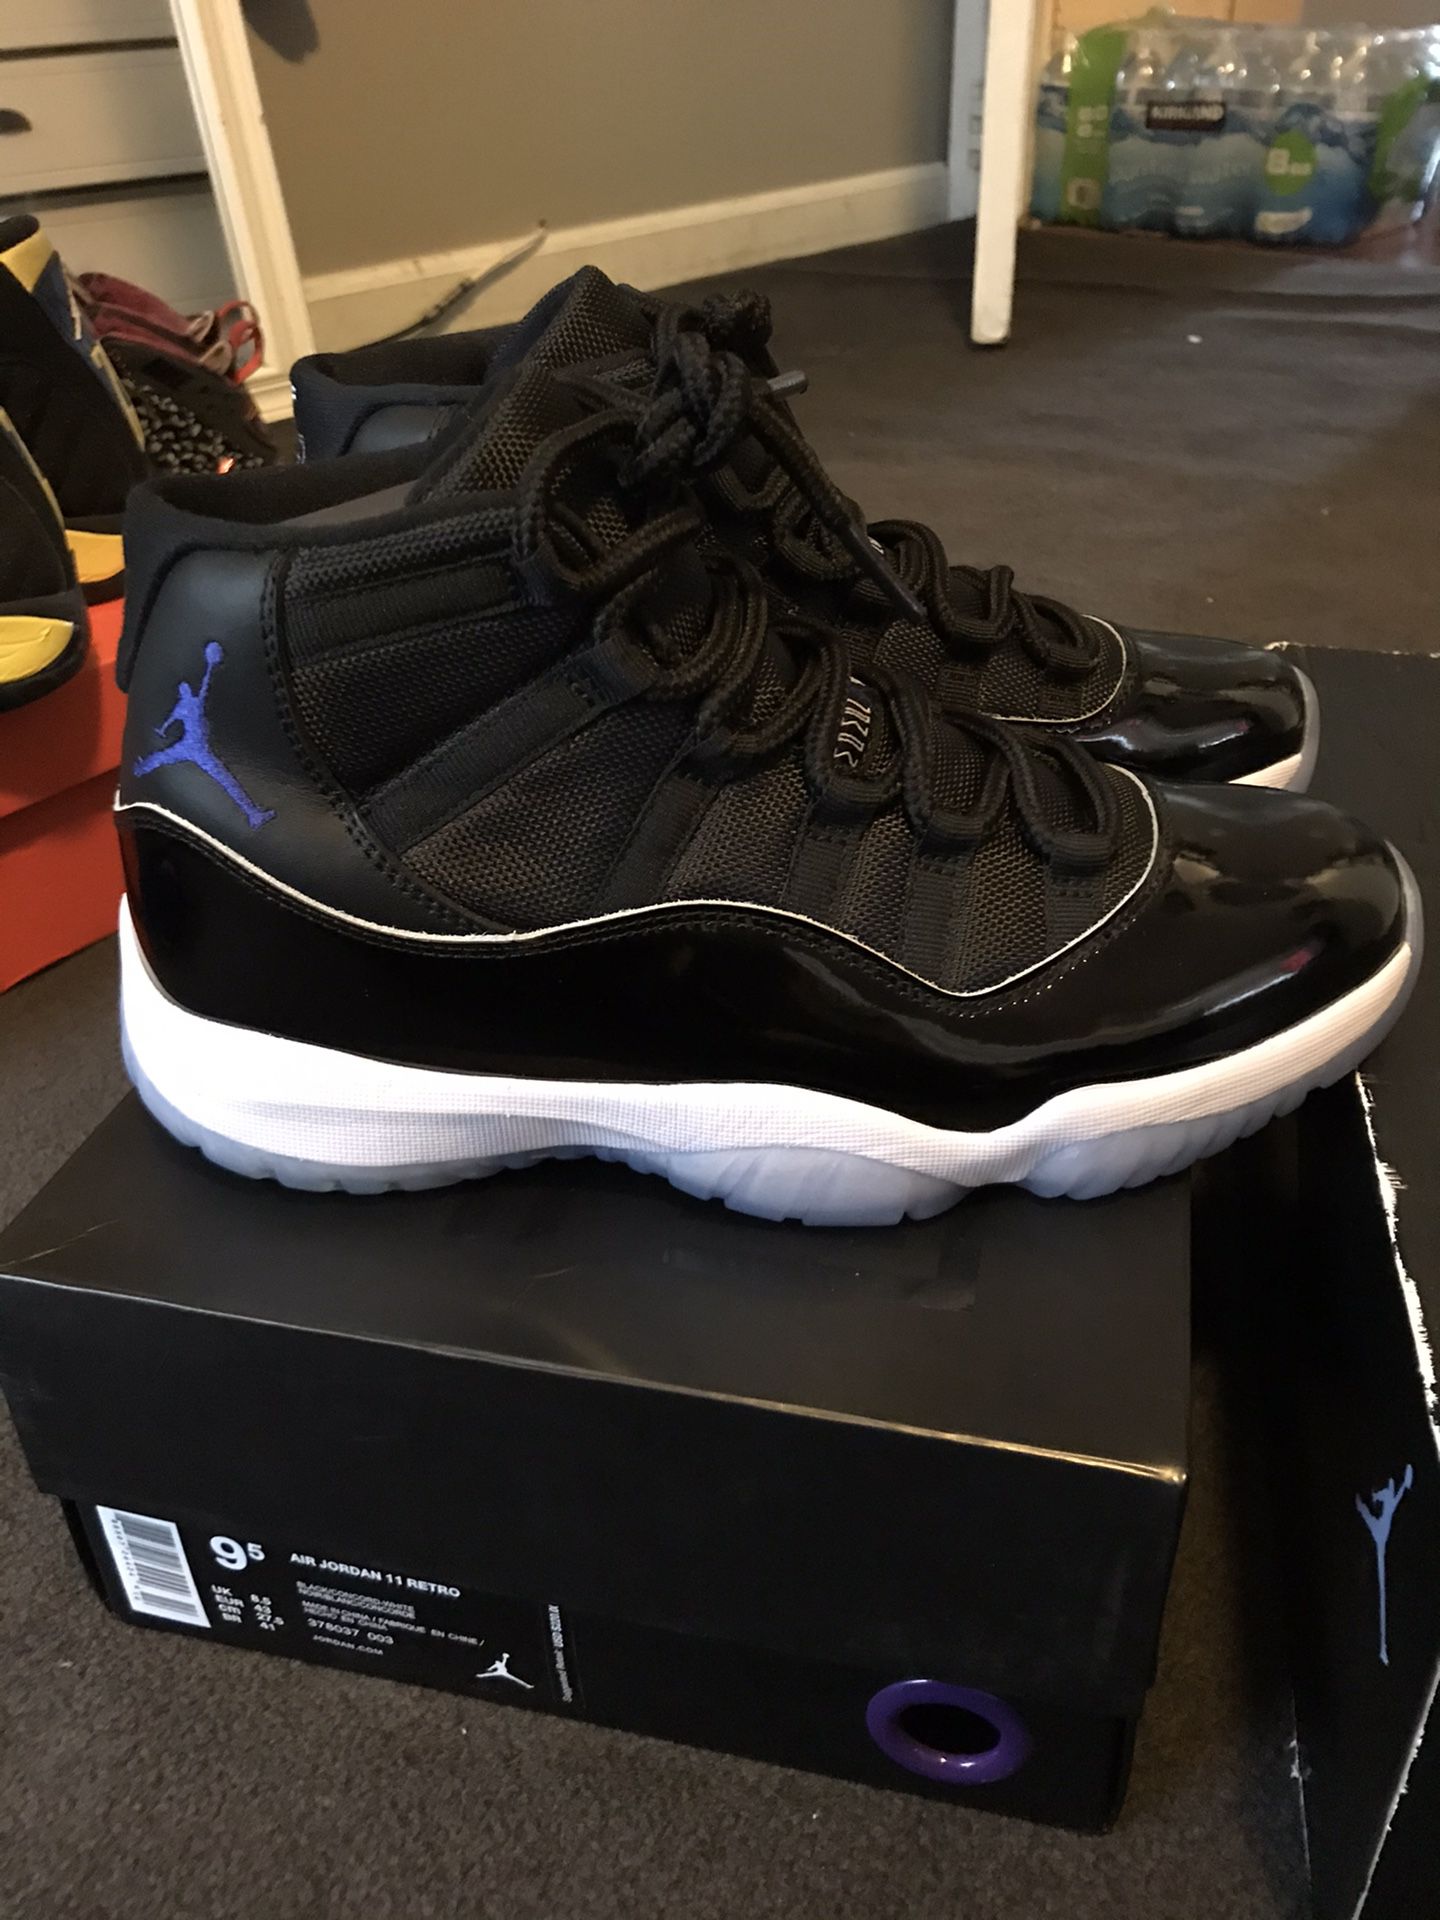 Space jams 11 size 9.5